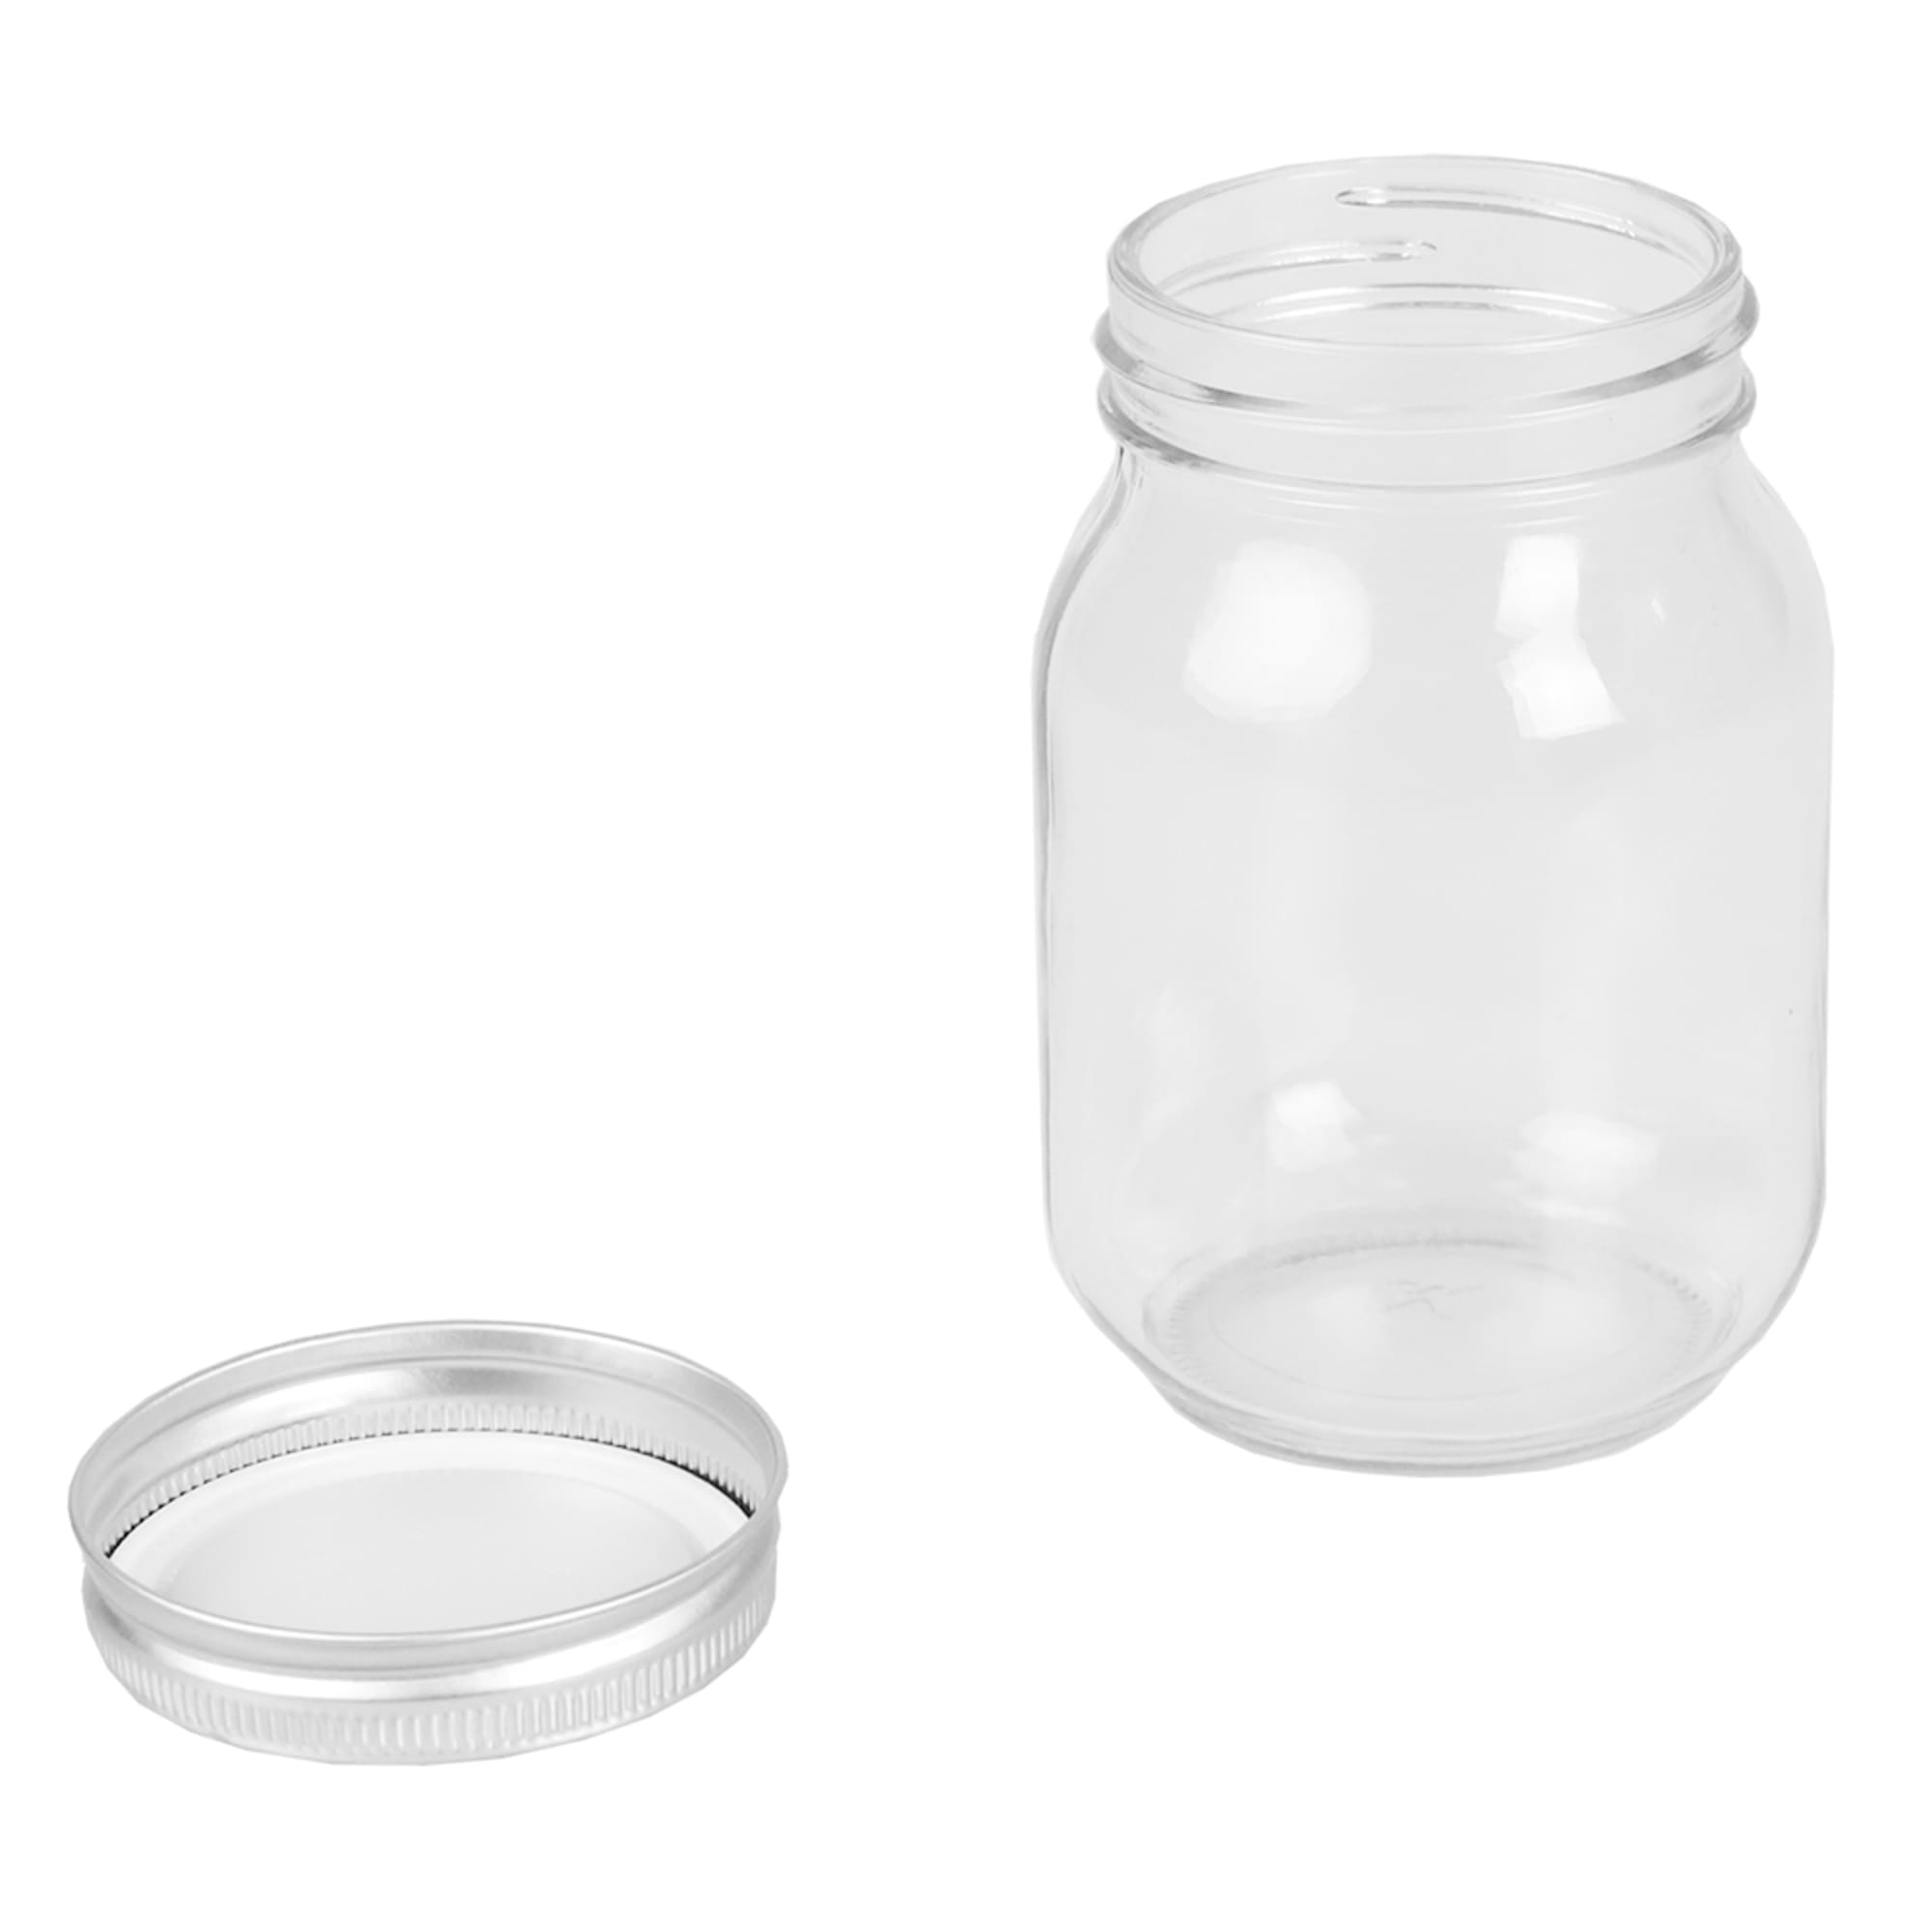 Home Basics 16 oz. Wide Mouth Clear Mason Canning Jar $1.50 EACH, CASE PACK OF 12